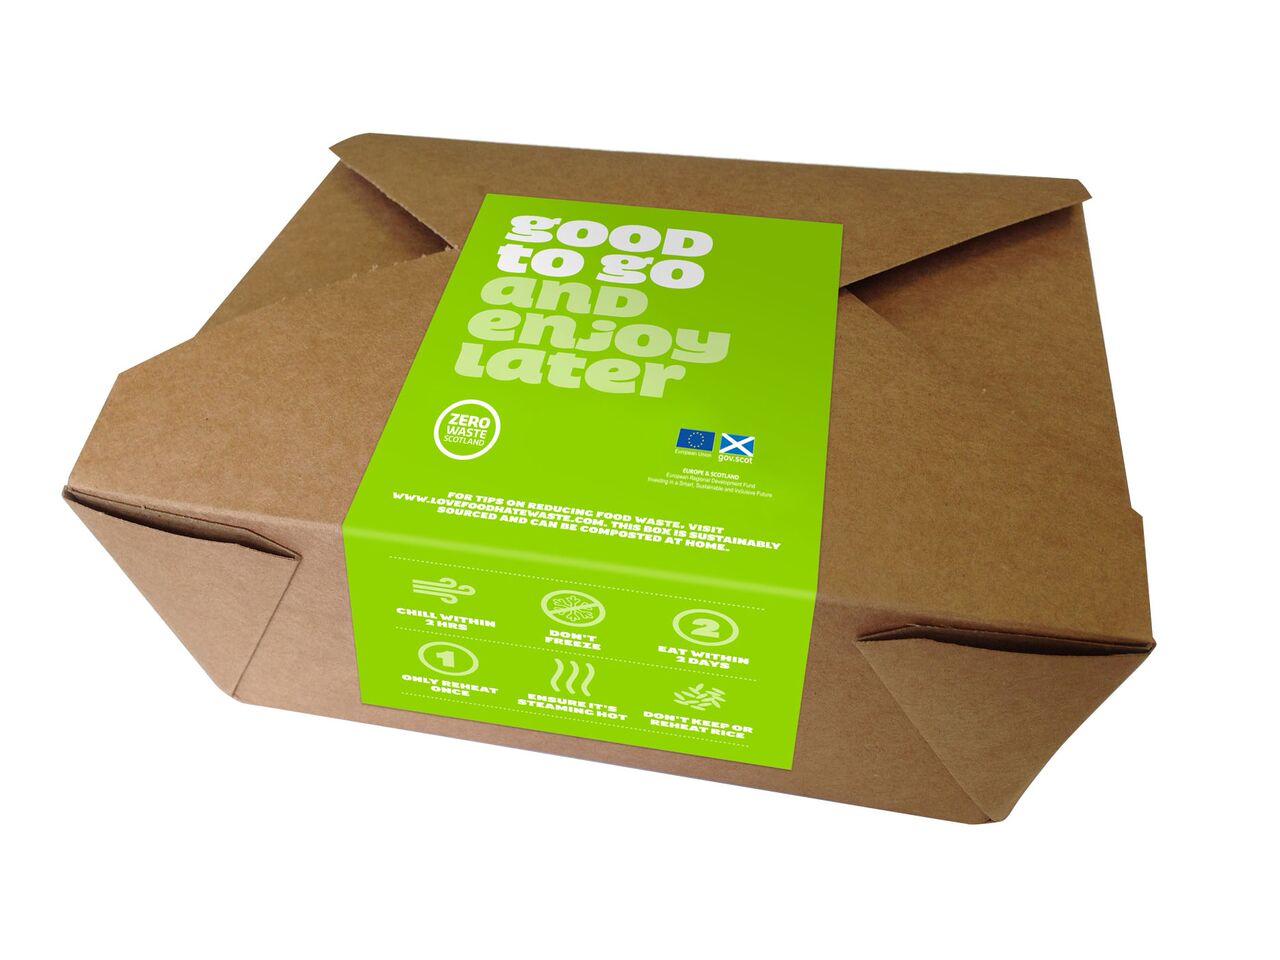 'Good to Go' doggy bags